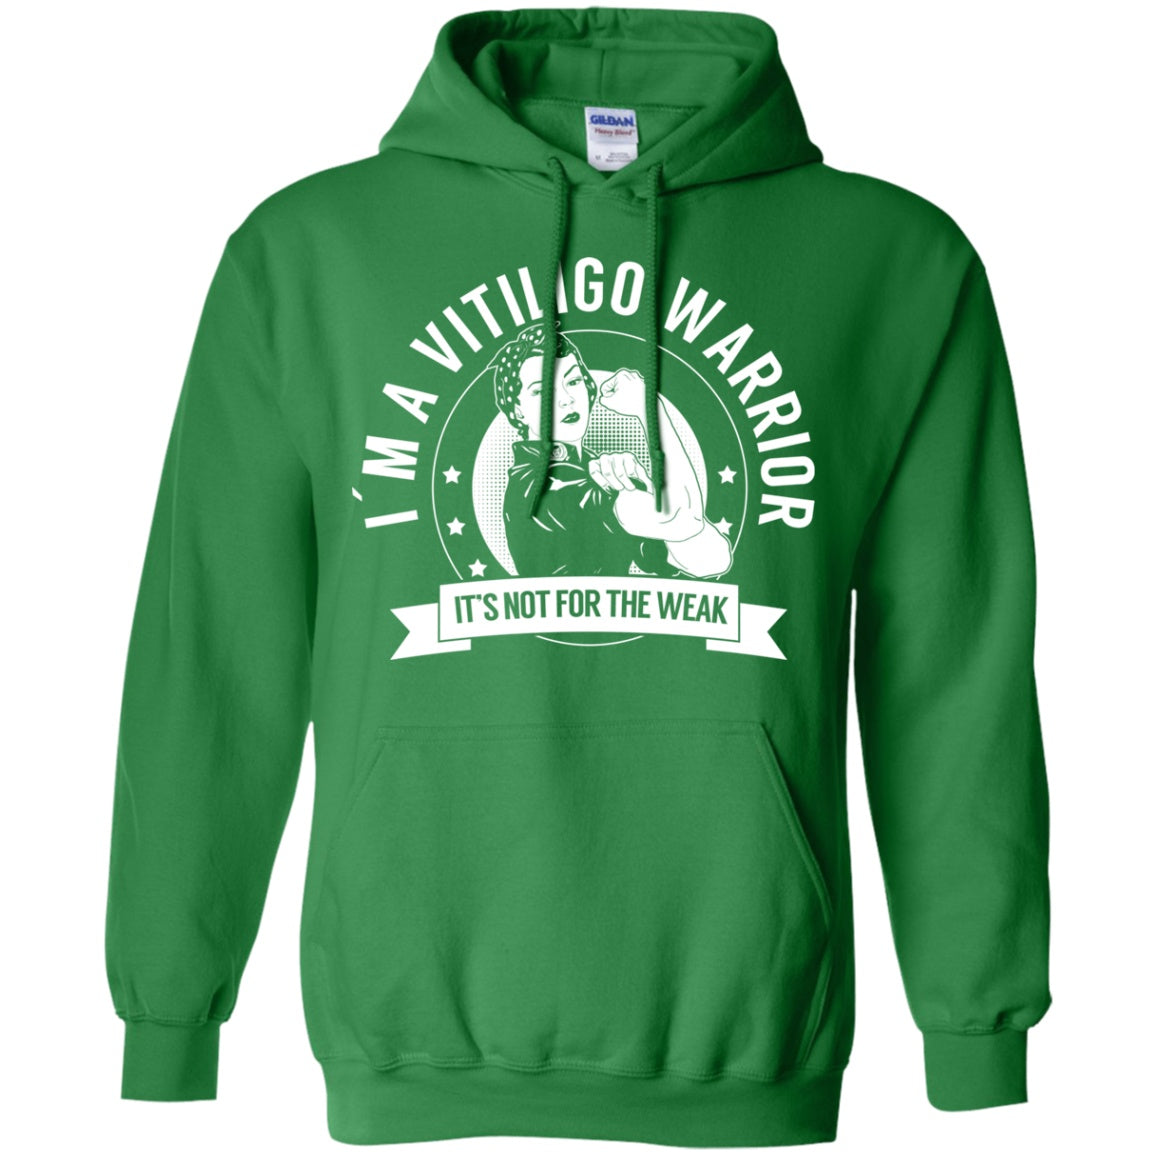 Vitiligo Warrior NFTW Pullover Hoodie 8 oz. - The Unchargeables